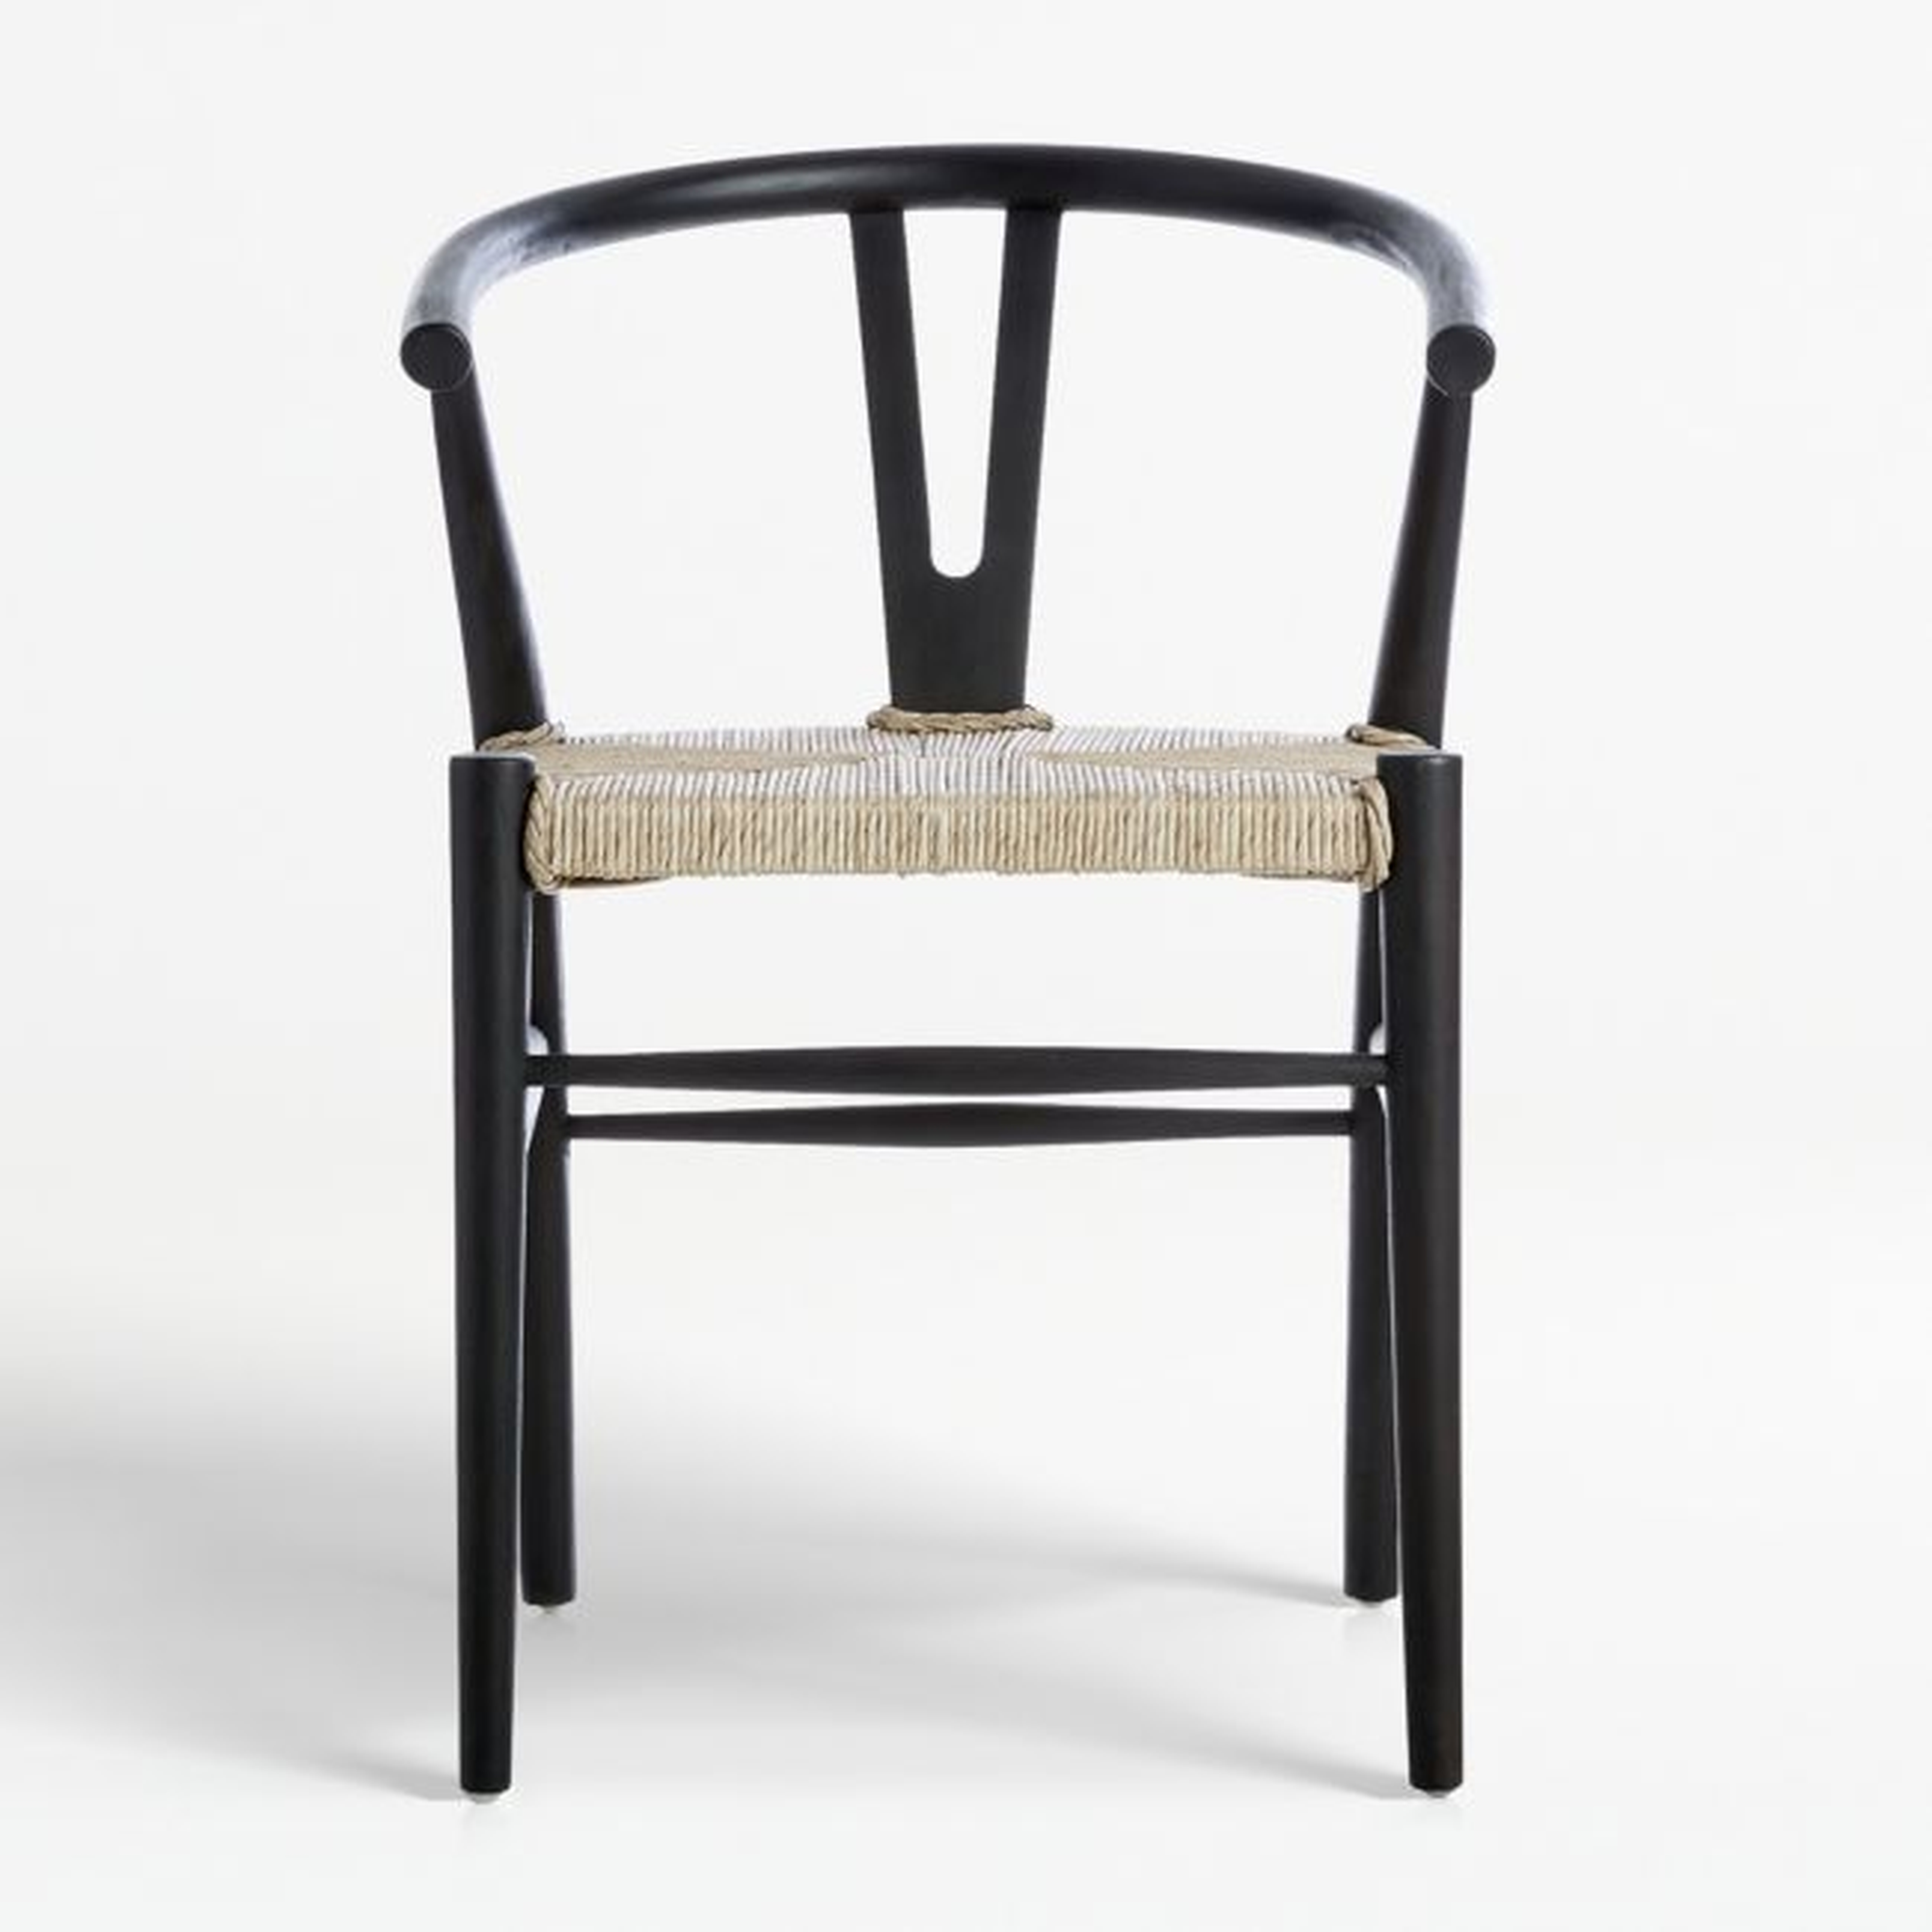 Crescent Black Wood Wishbone Dining Chair - Crate and Barrel